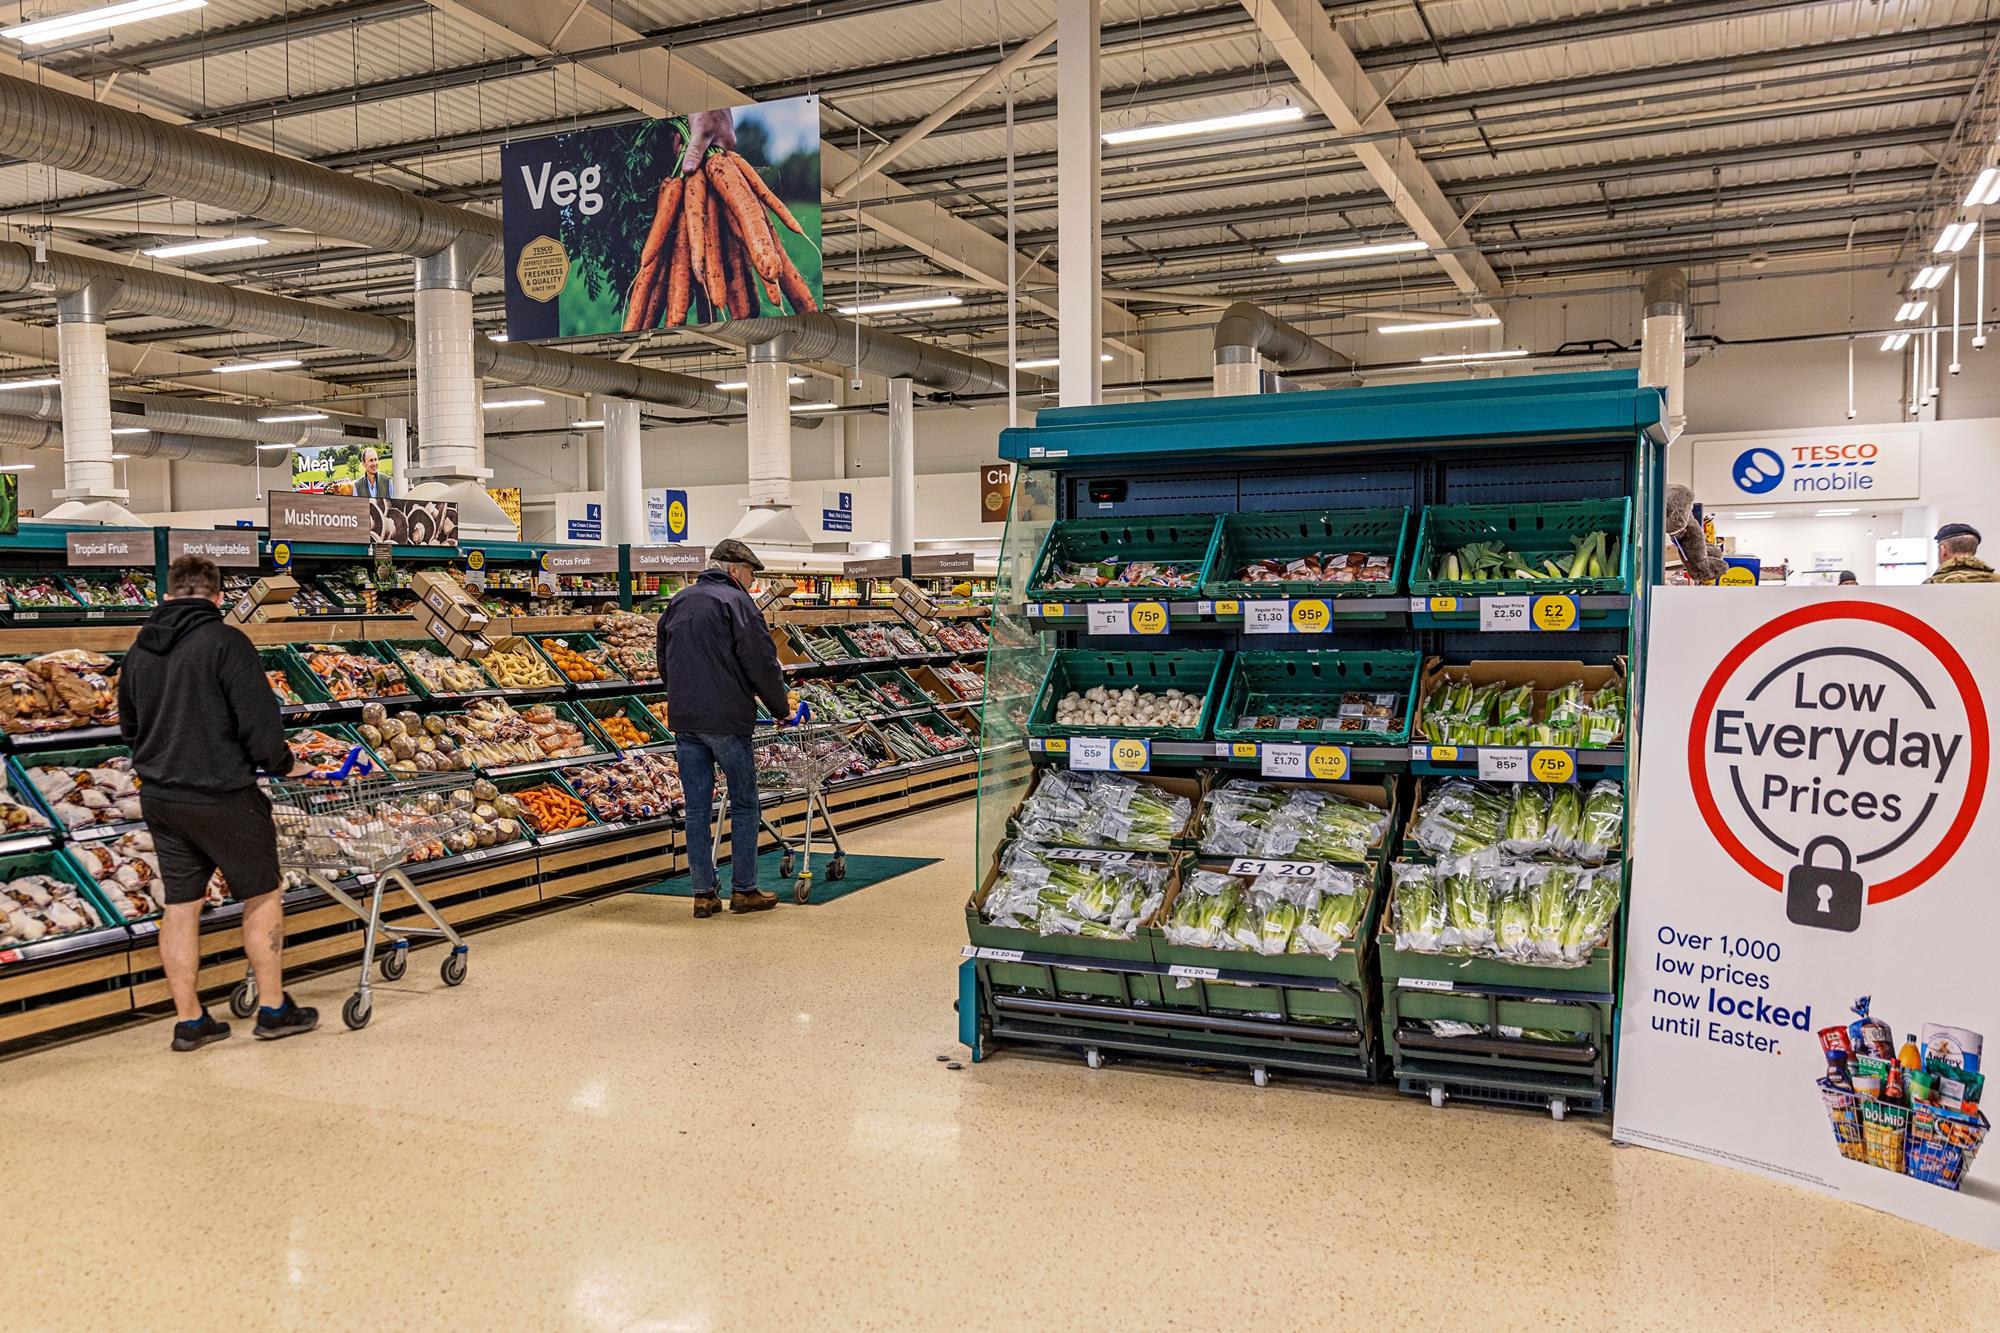 Tesco wins with 'appealing' displays and helpful staff